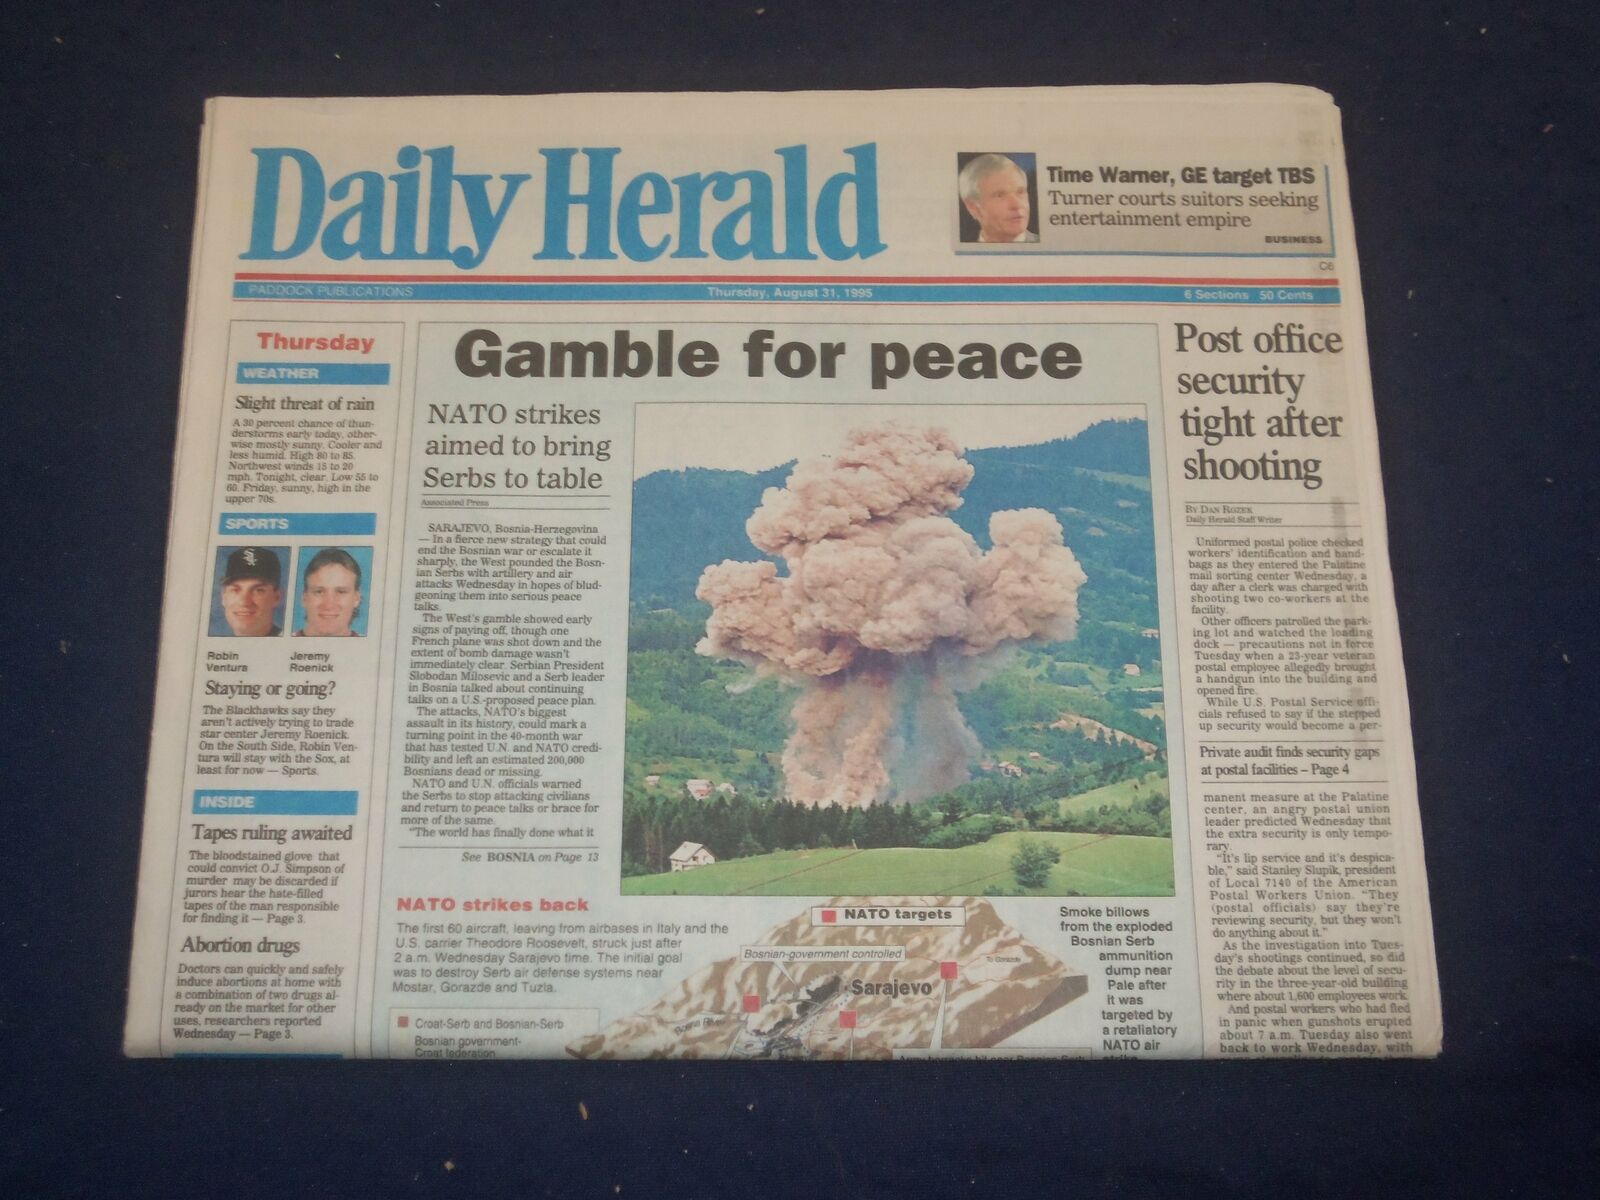 1995 AUGUST 31 DAILY HERALD NEWSPAPER - POST OFFICE SHOOTING CHICAGO - NP 3200L